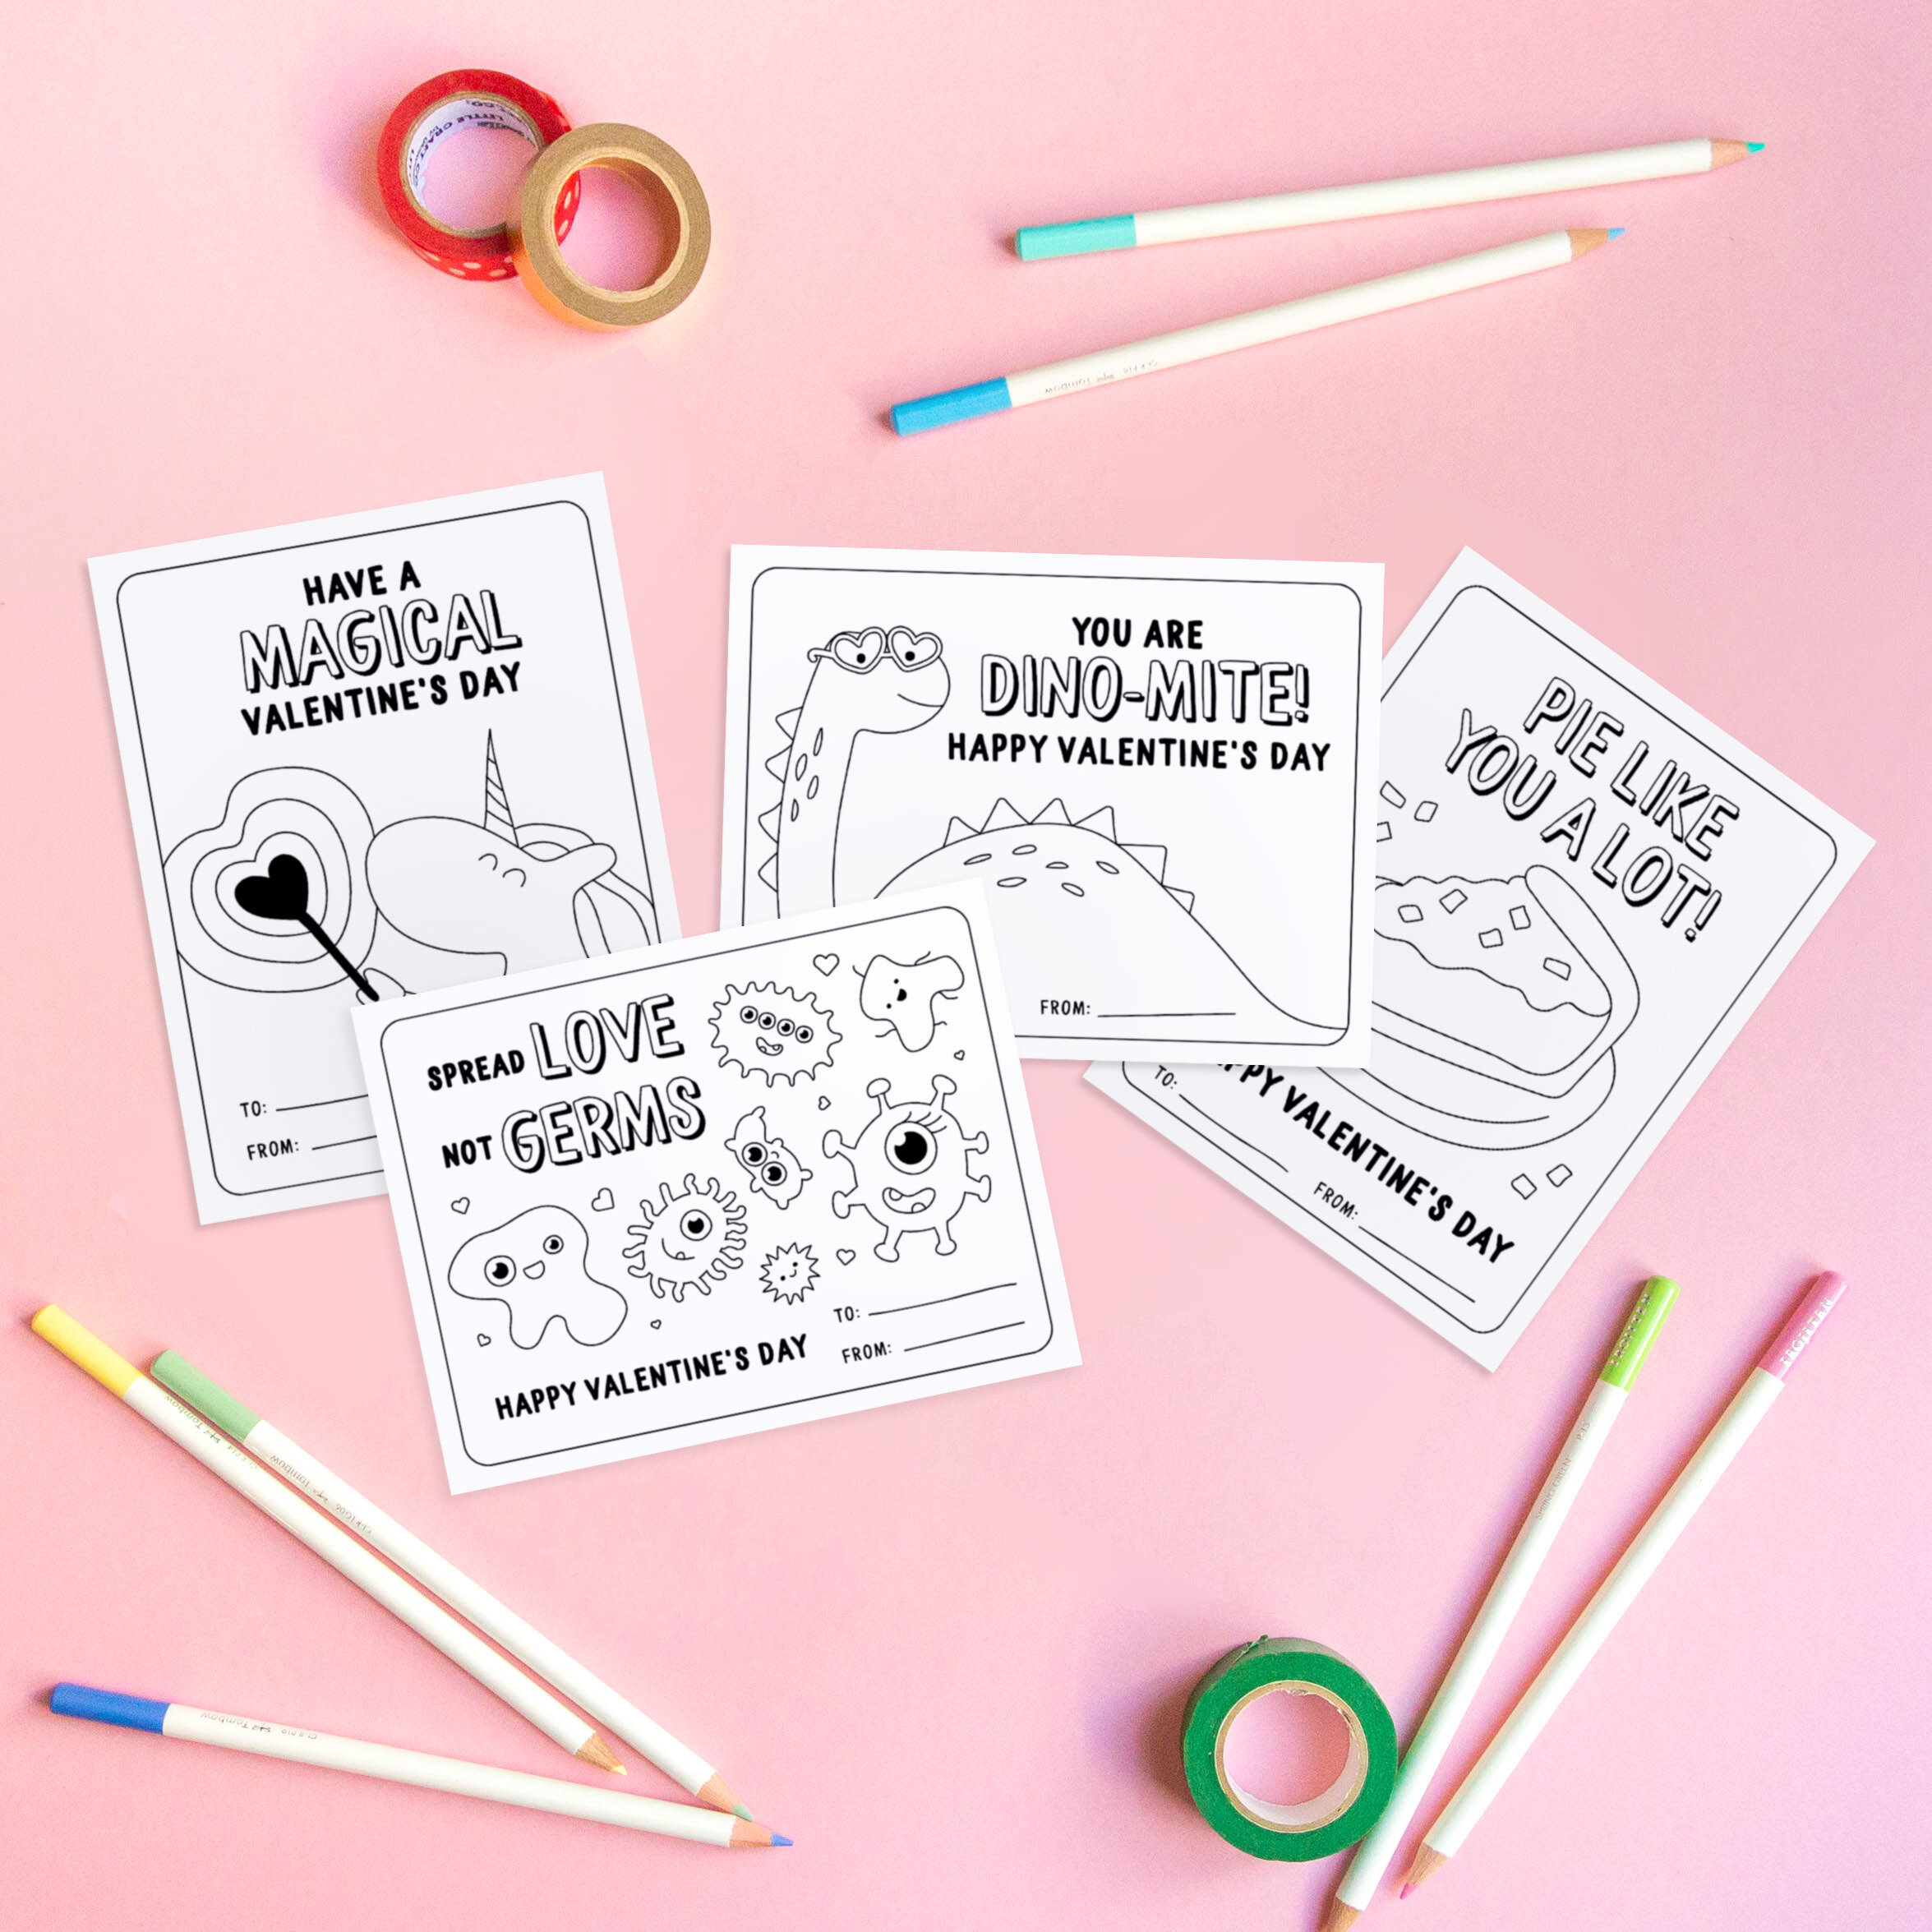 Loving this year! - Pencil Valentine's Day Cards {With Free